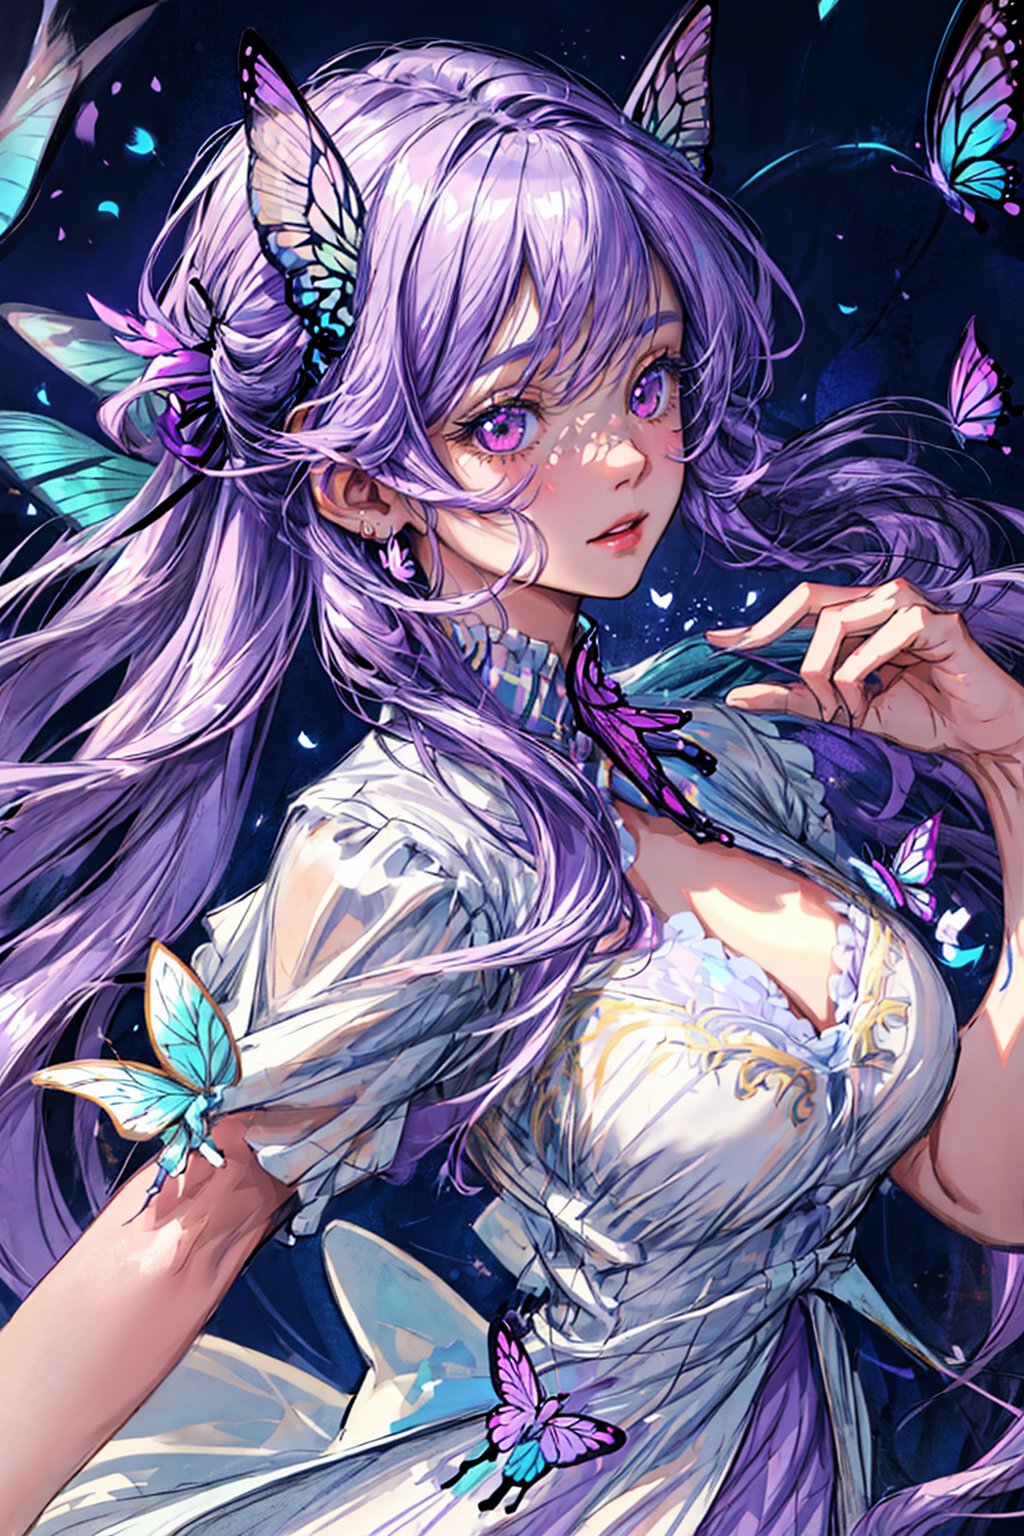 masterpiece, 1 girl, Extremely beautiful woman, looking up, standing in a lake with very large glowing lavender butterfly wings, glowing hair, long cascading hair, neon hair, ornate lavender and white butterfly dress, twilight, raining, lots of glowing butterflies flying around, full lips, hyperdetailed face, detailed eyes, dynamic pose, cinematic lighting, pastel colors,perfecteyes